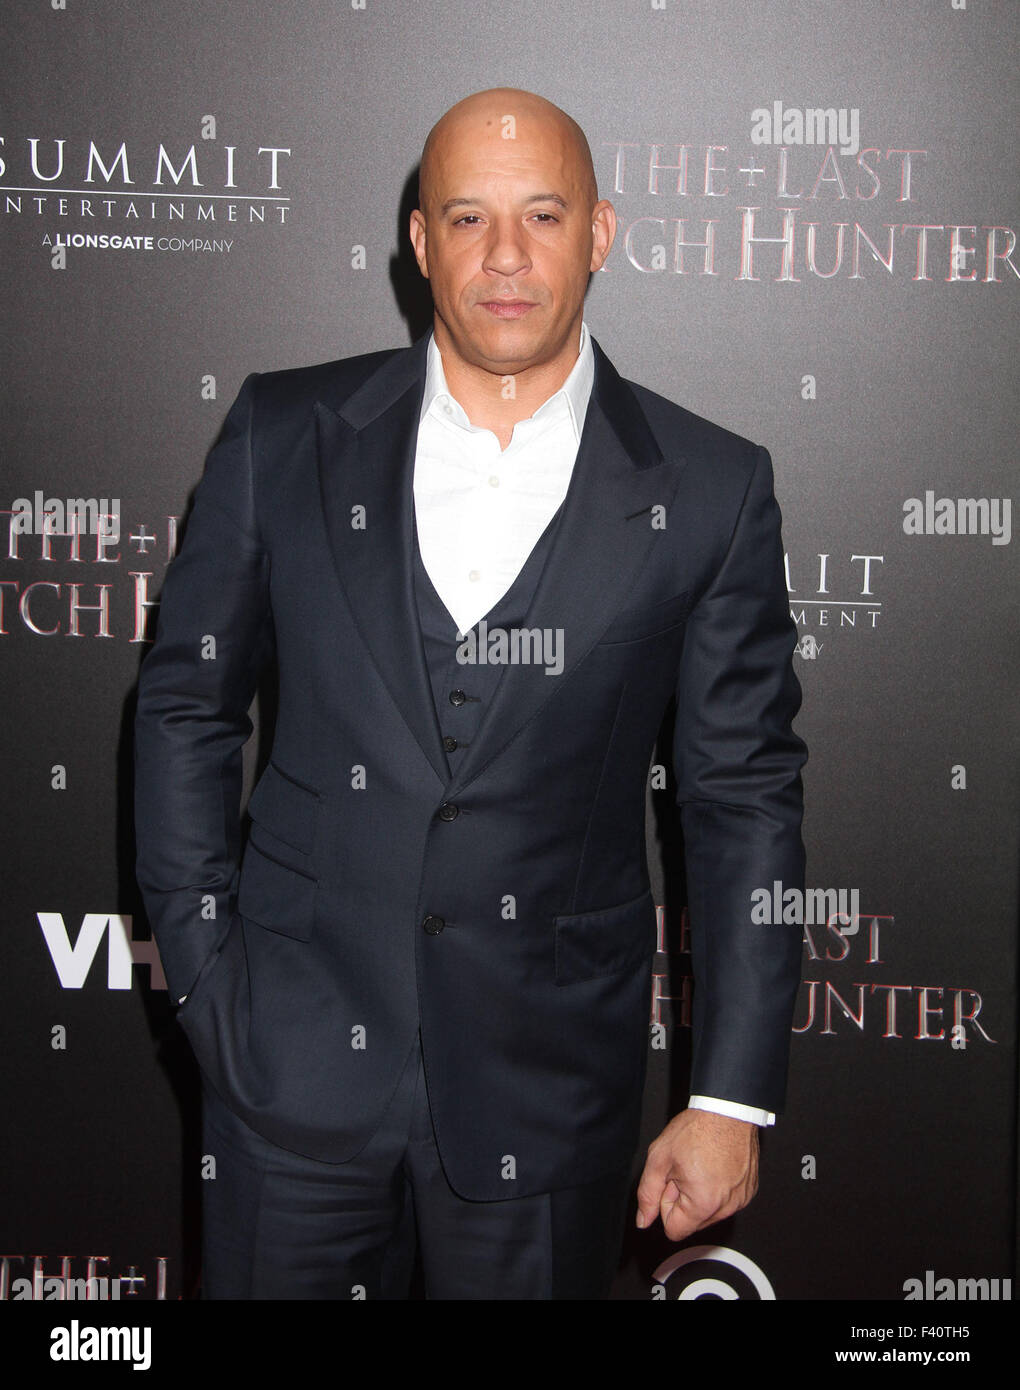 New York, USA. 13th Oct, 2015. Actor VIN DIESEL attends the New York special screening of 'The Last Witch Hunter' held at AMC Loews Lincoln Square. Credit:  Nancy Kaszerman/ZUMA Wire/Alamy Live News Stock Photo